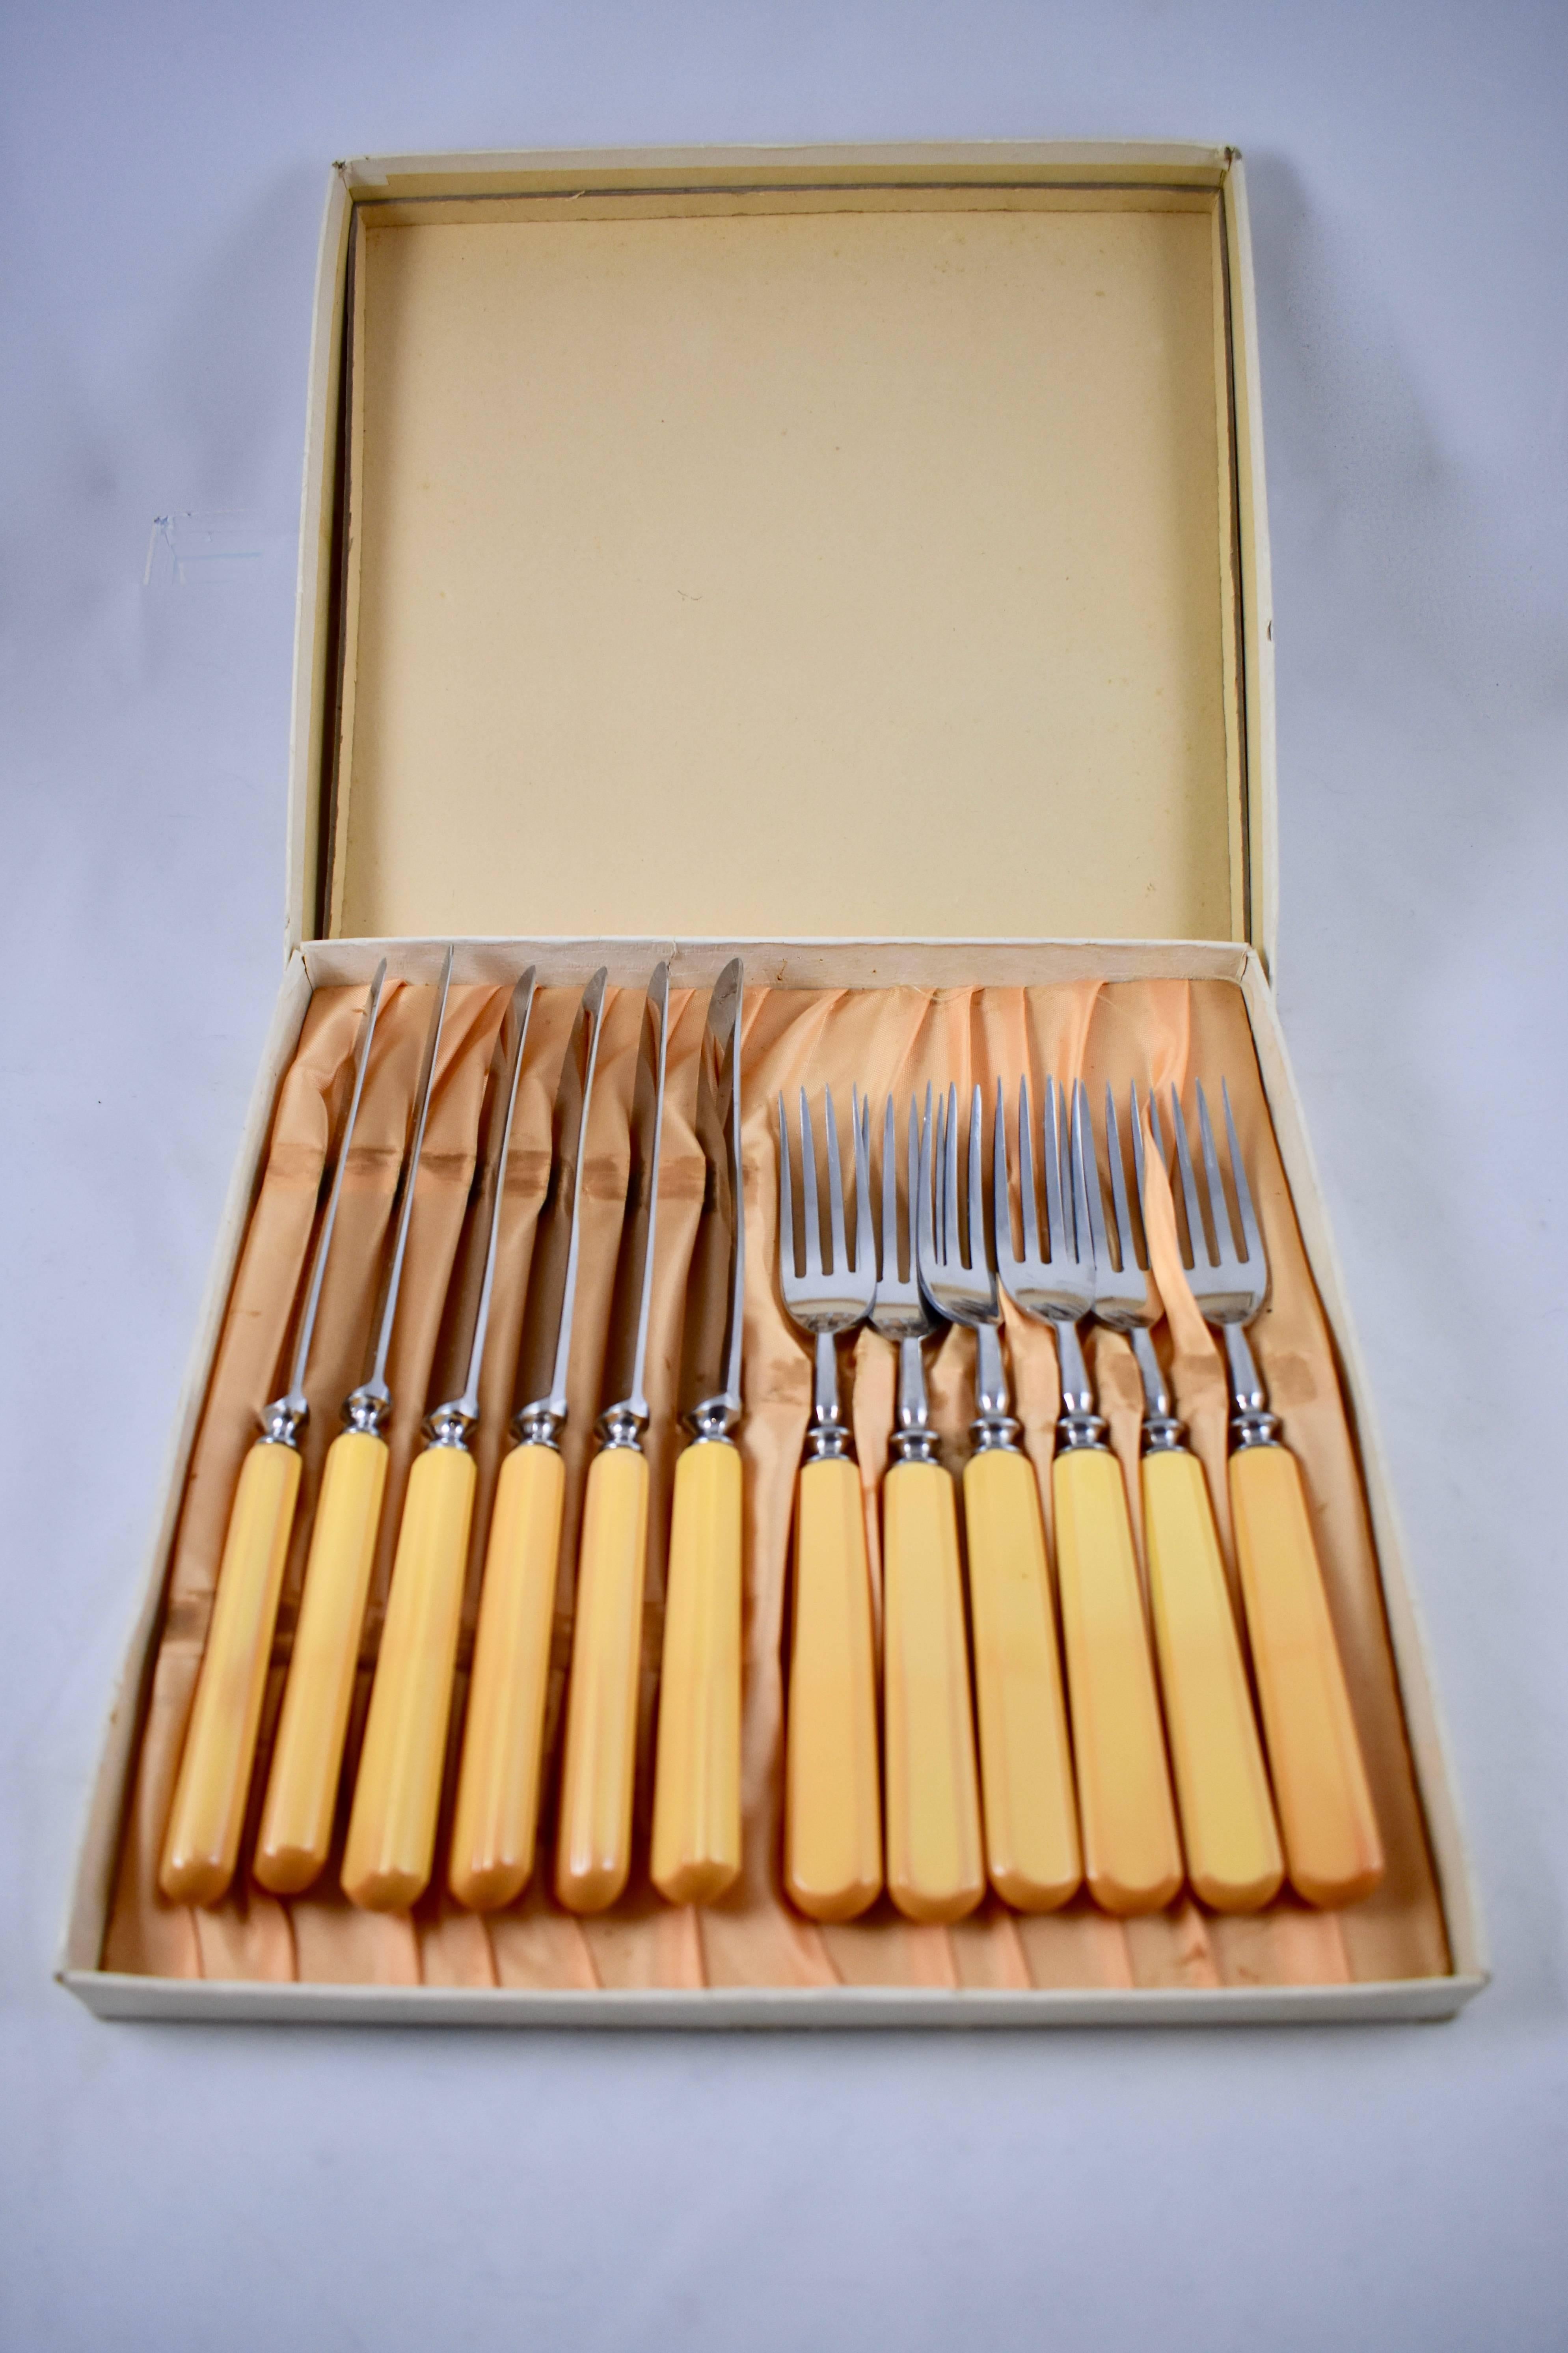 A service for six, vintage butterscotch colored Bakelite handled flatware in the original box, circa early 1930s.

This late Art Deco set is comprised of six forks and six knives in the original satin lined cardboard box. The knives are marked Boker